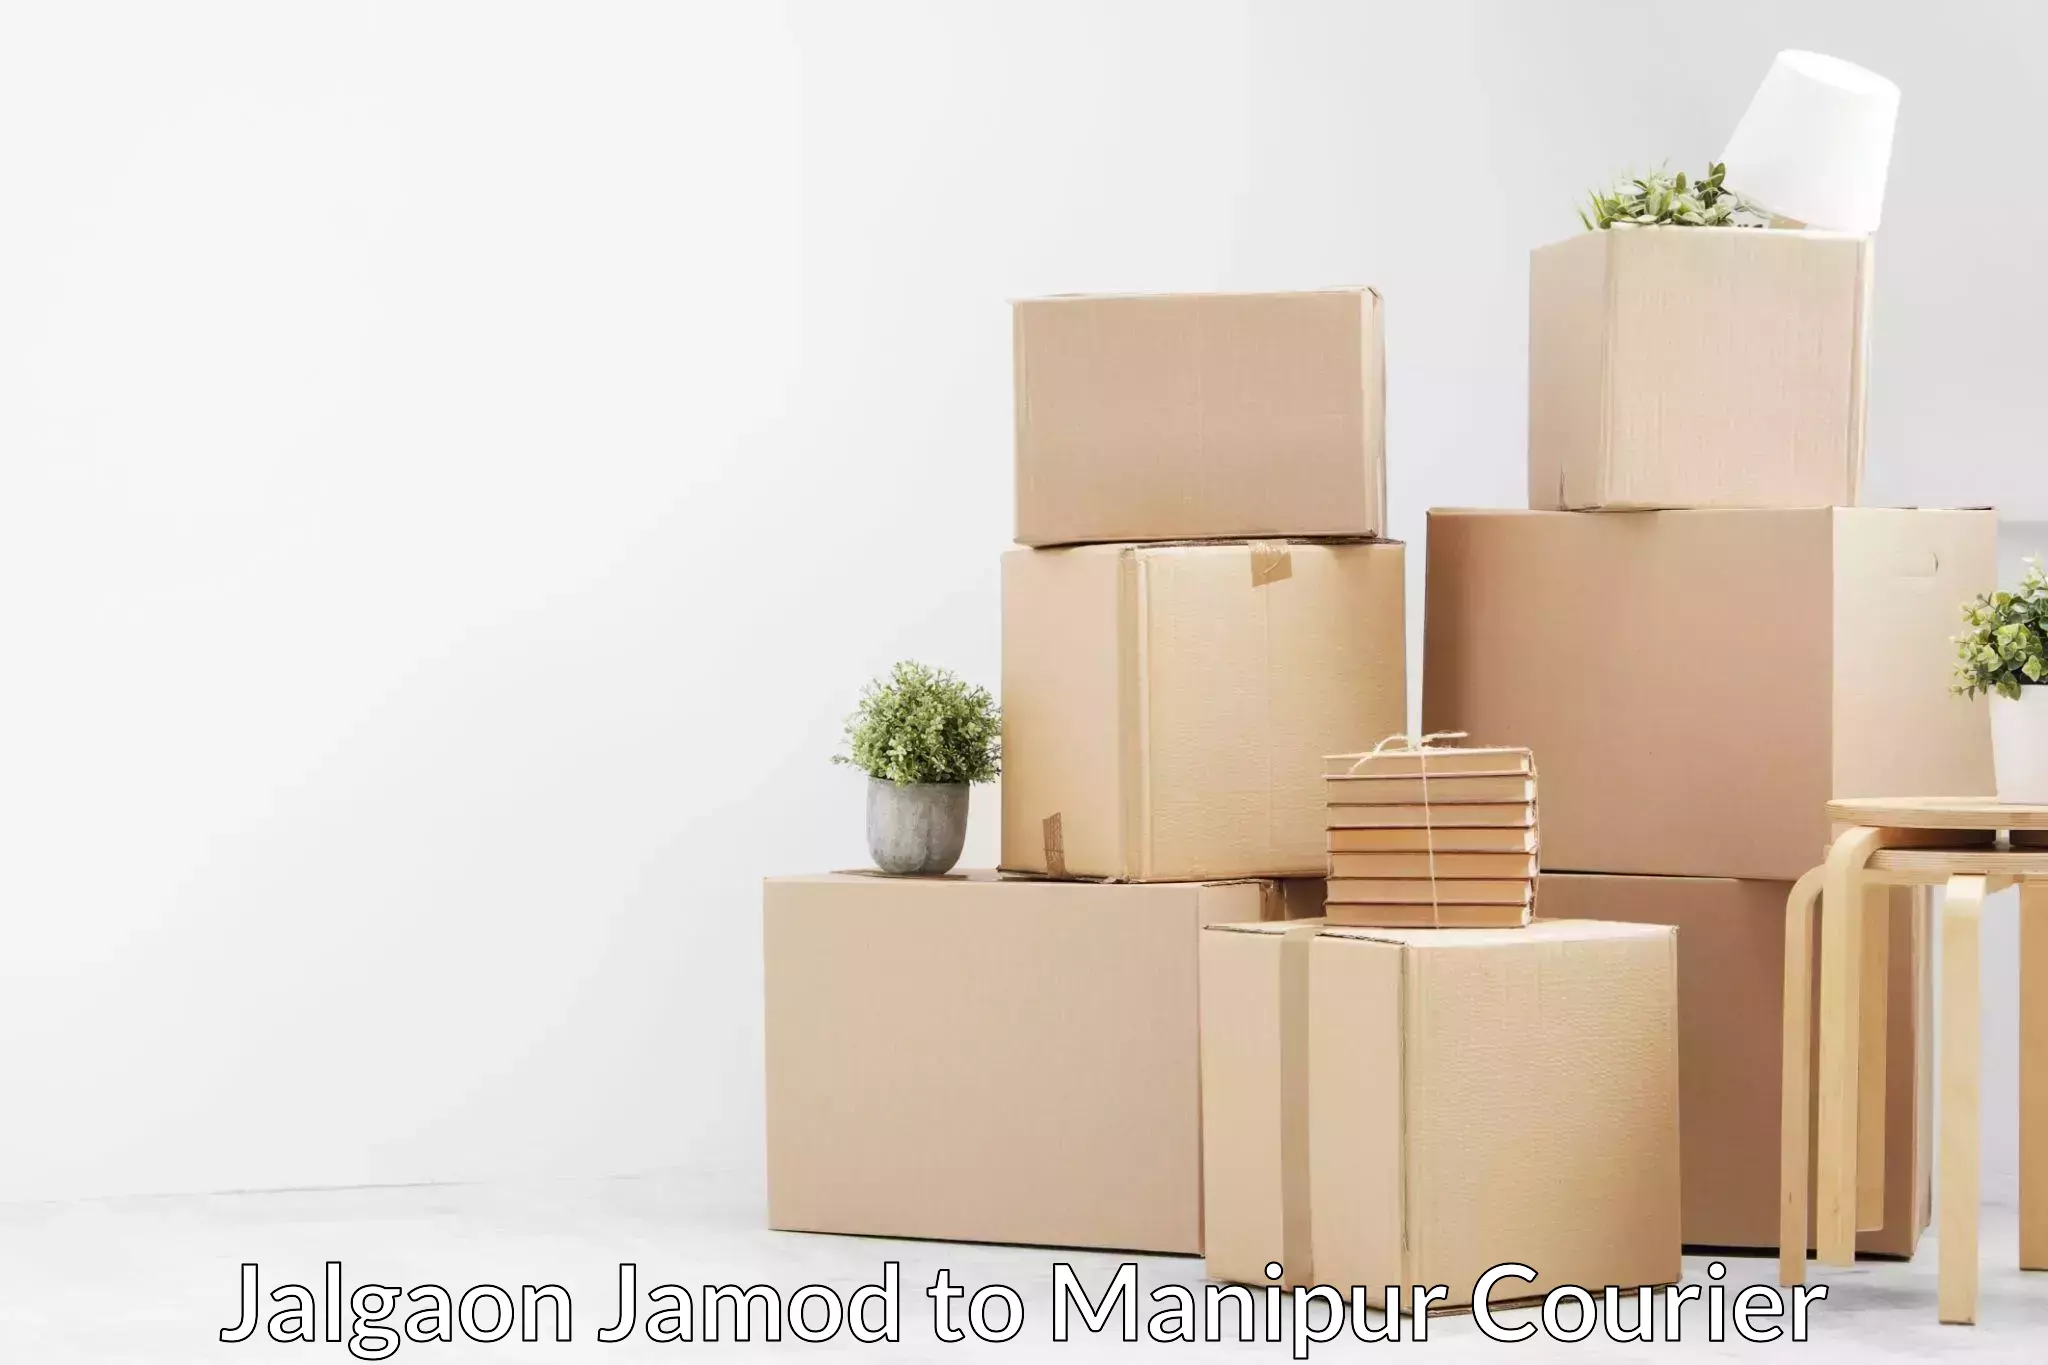 Efficient relocation services Jalgaon Jamod to Tamenglong